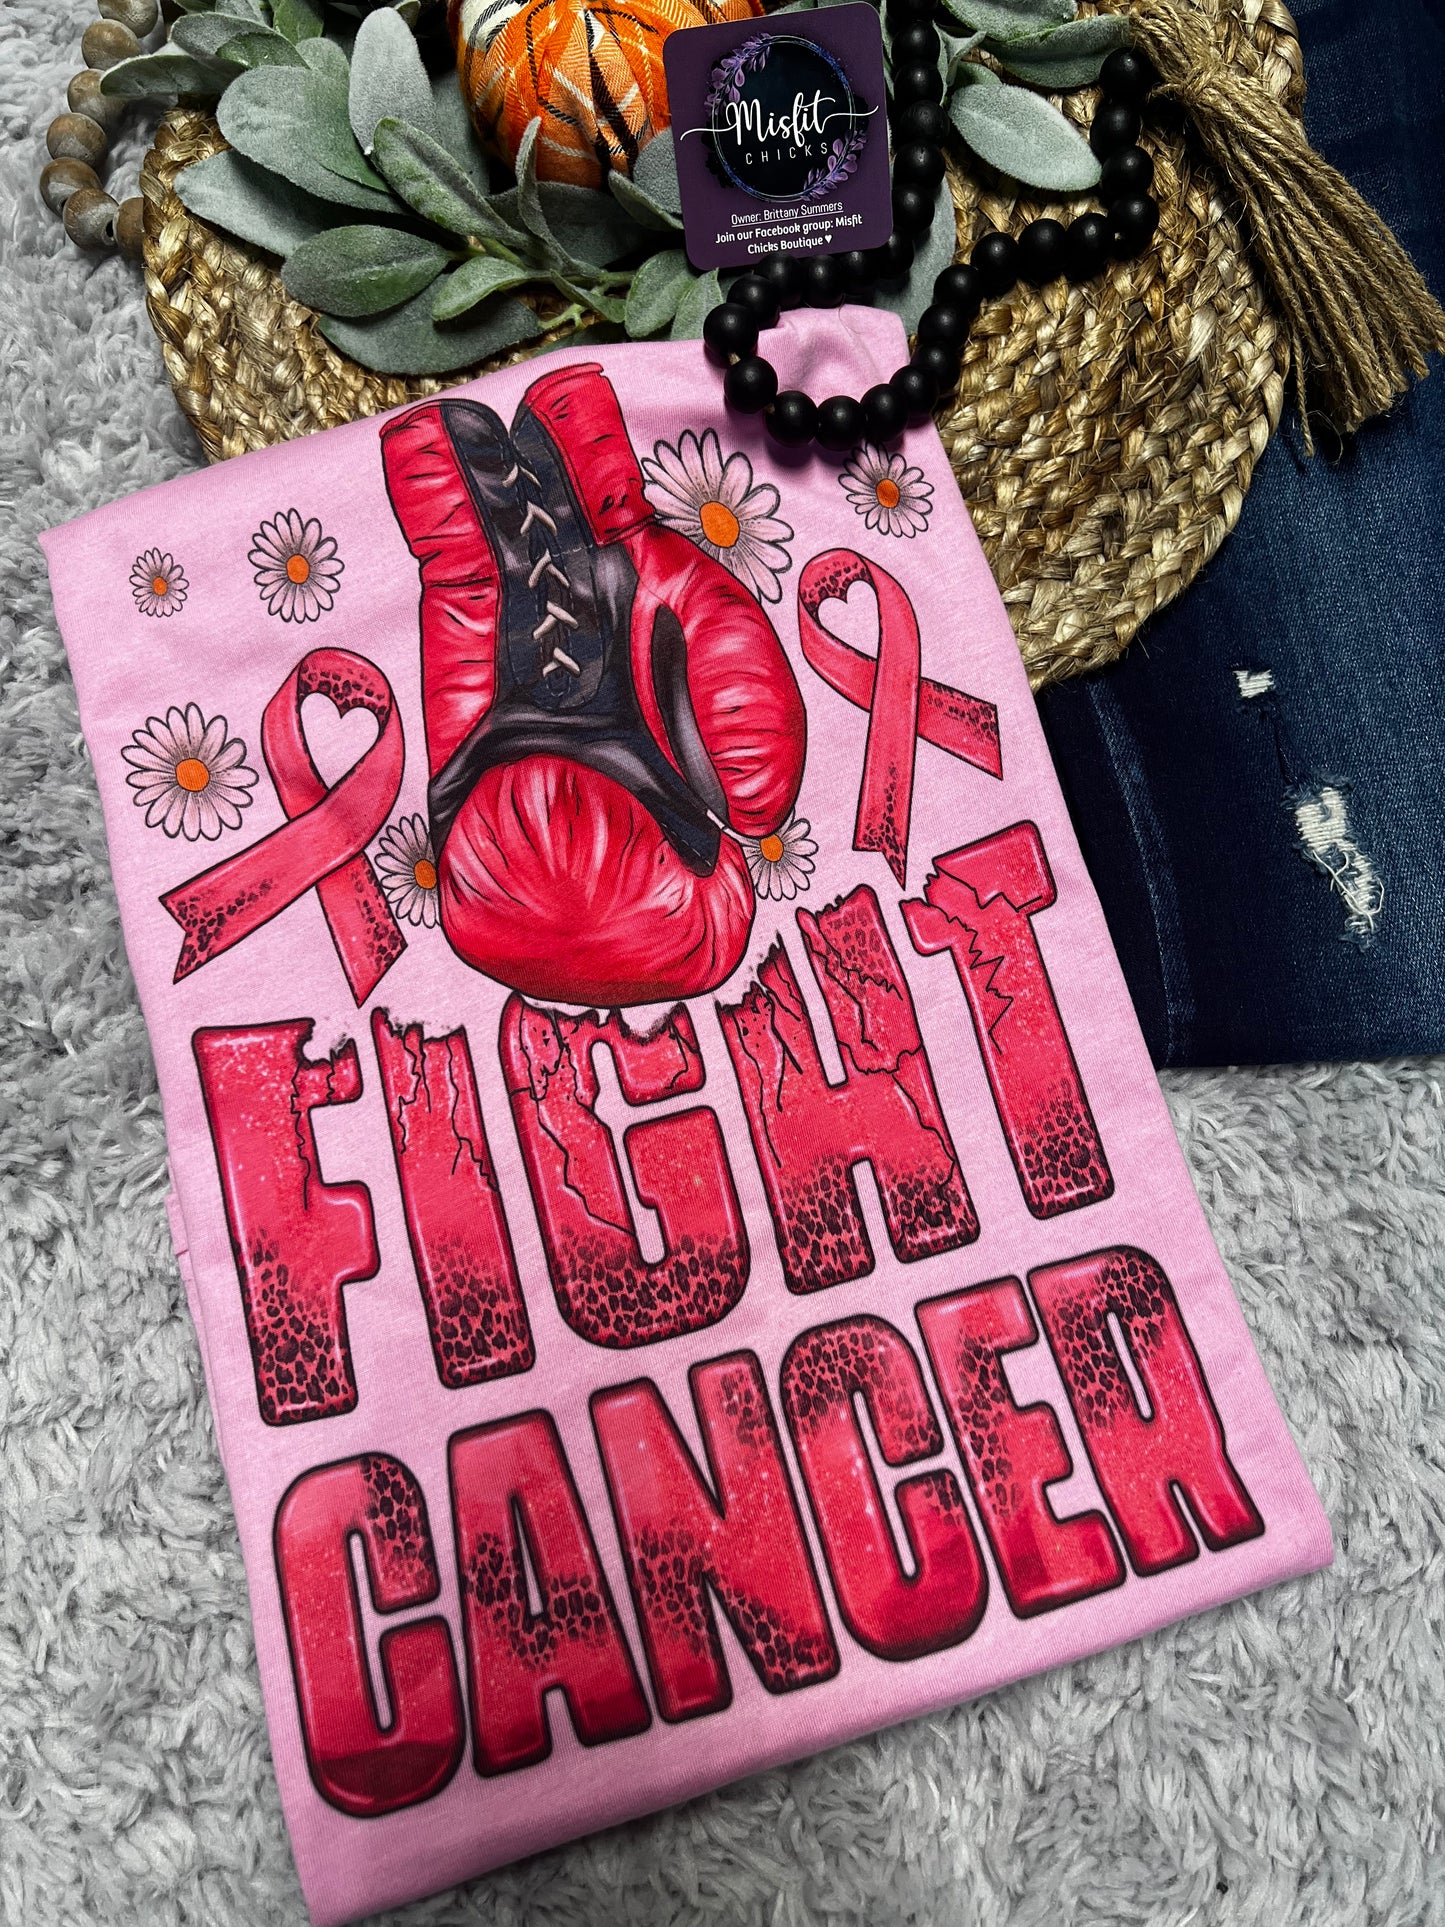 FIGHT CANCER TEE